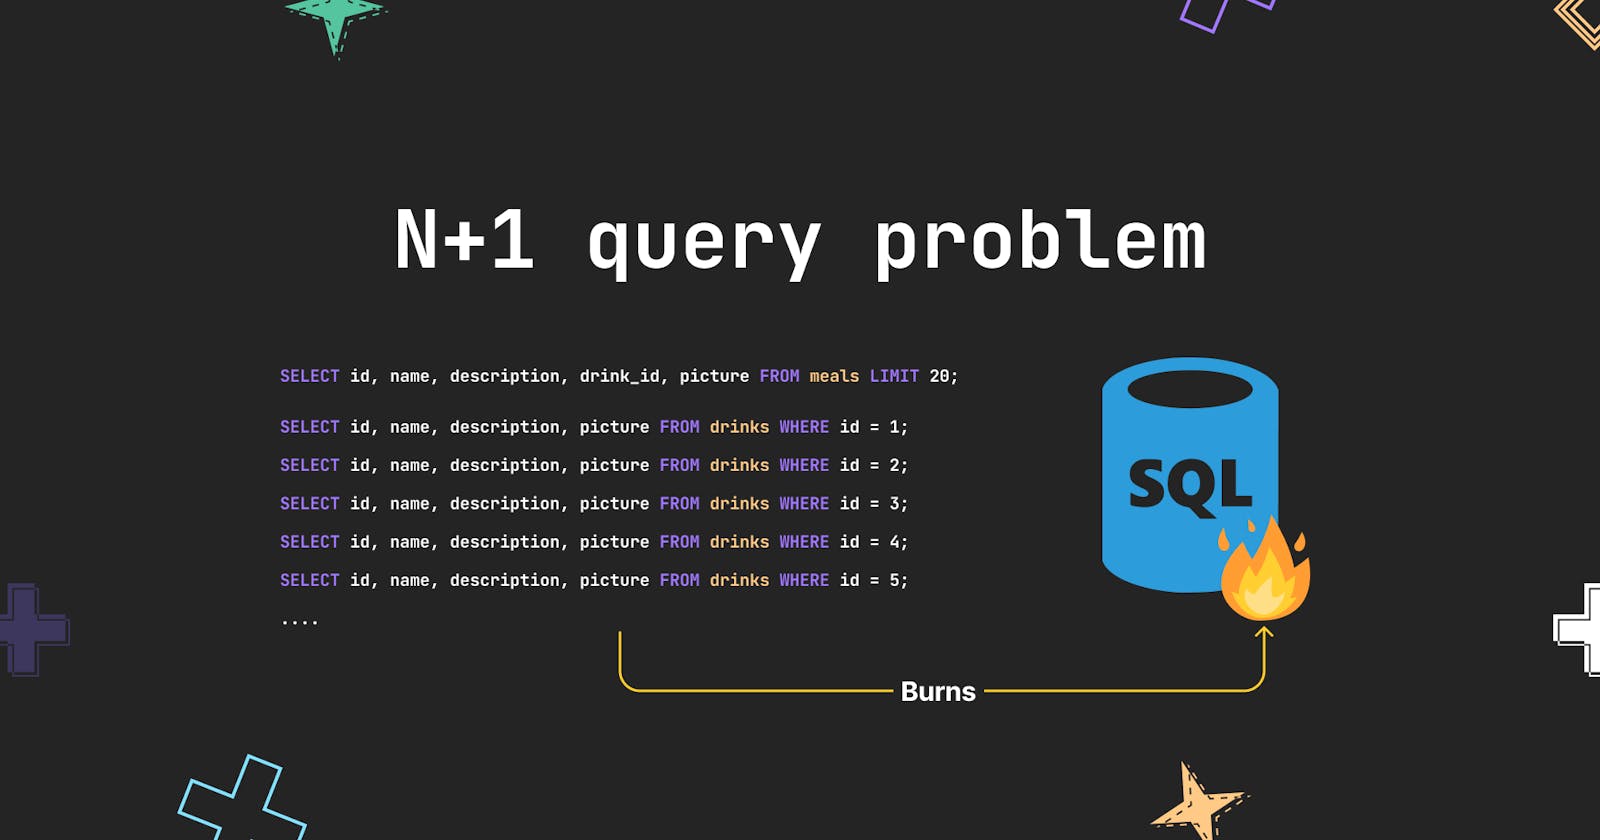 How the N+1 query problem can burn your database